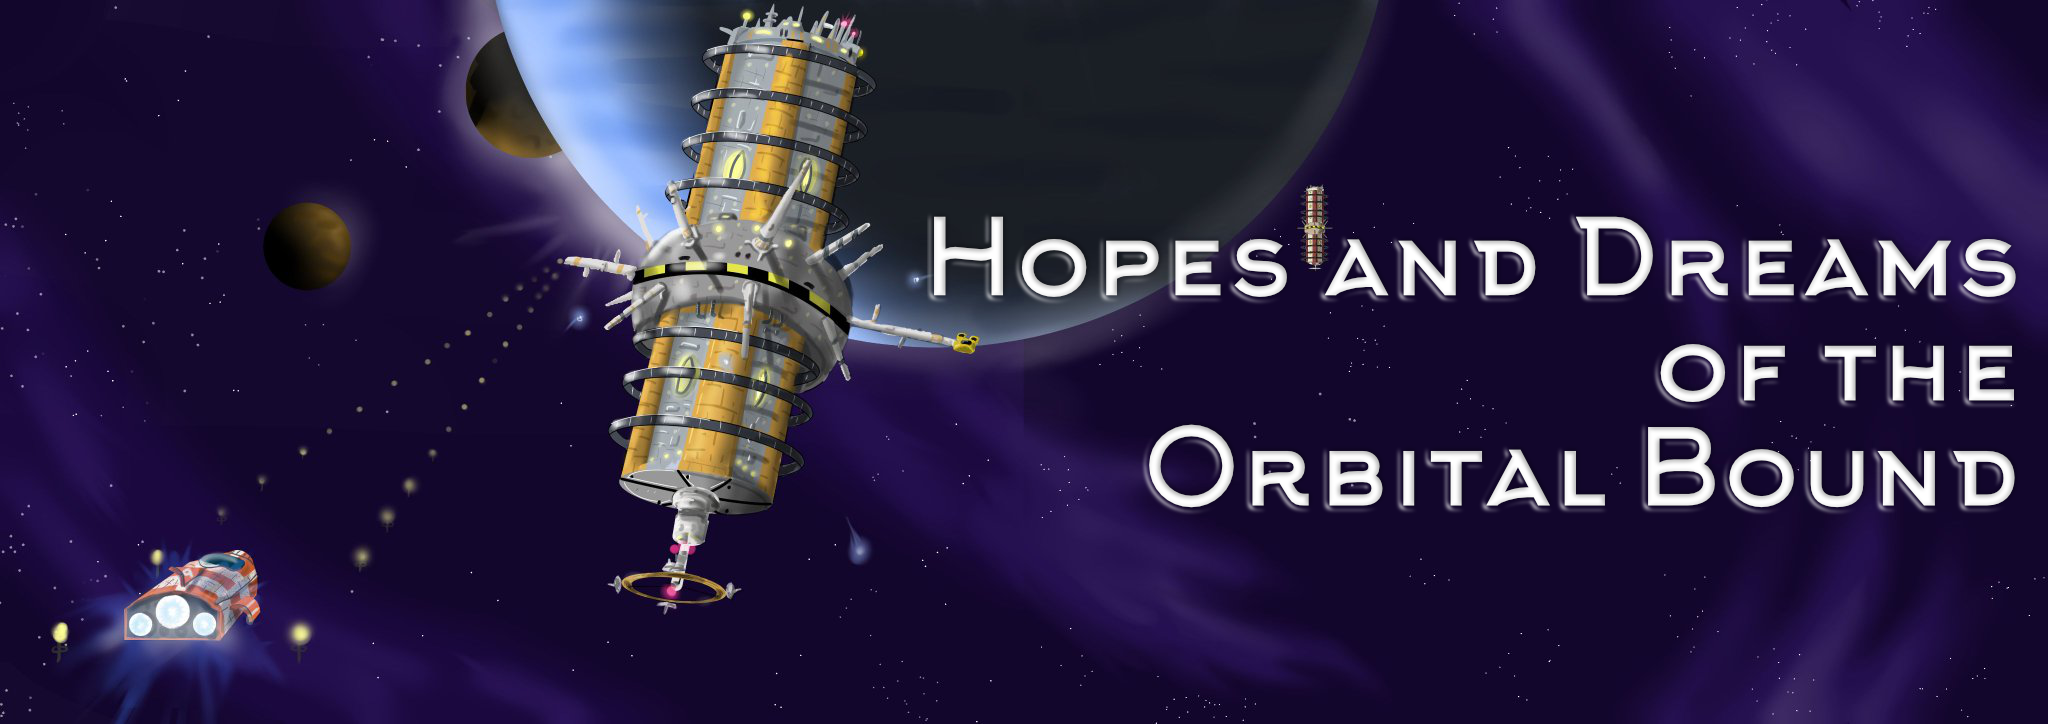 Hopes and Dreams of the Orbital Bound